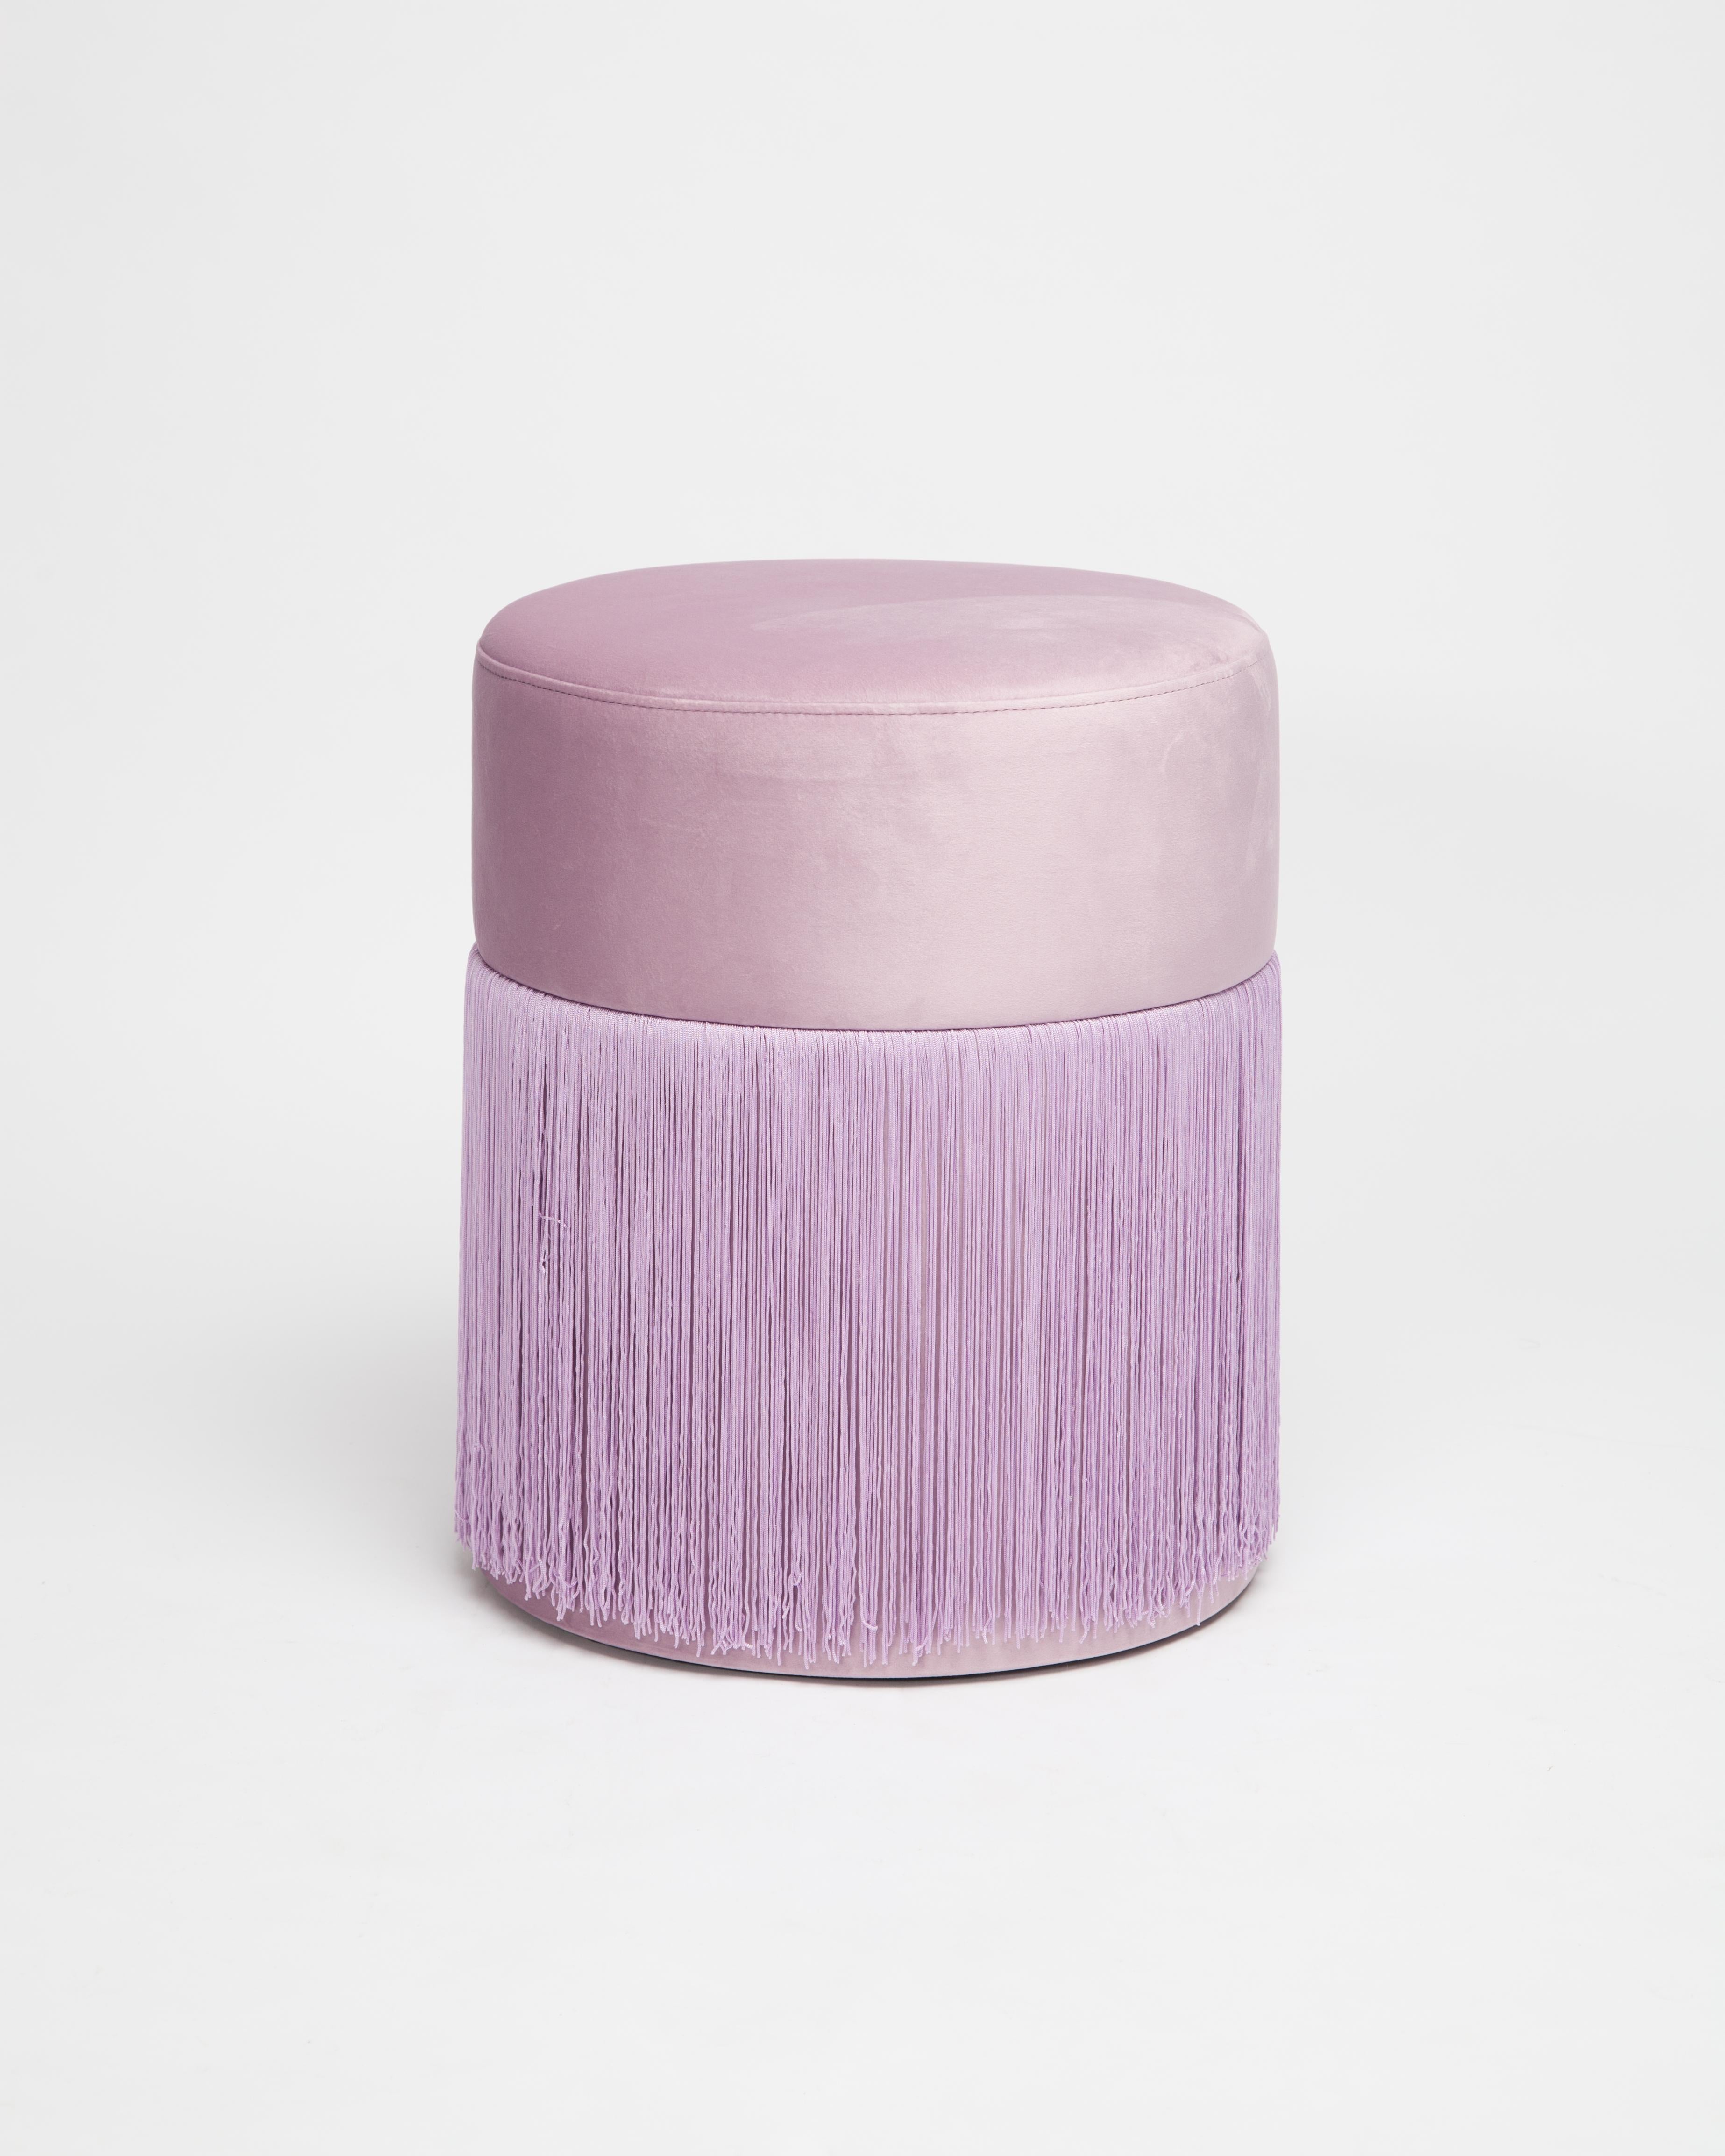 Pouf Pill S by Houtique
Dimensions: H 45 x D 35 cm
Materials: Velvet upholstery and 30cm fringes

Pill Pouf S
Art Deco style pouf with wood structure and velvet fabric.
2 fiber-board discs of 16mm, joined by wooden tufts.
Upholstery Velvet 100%